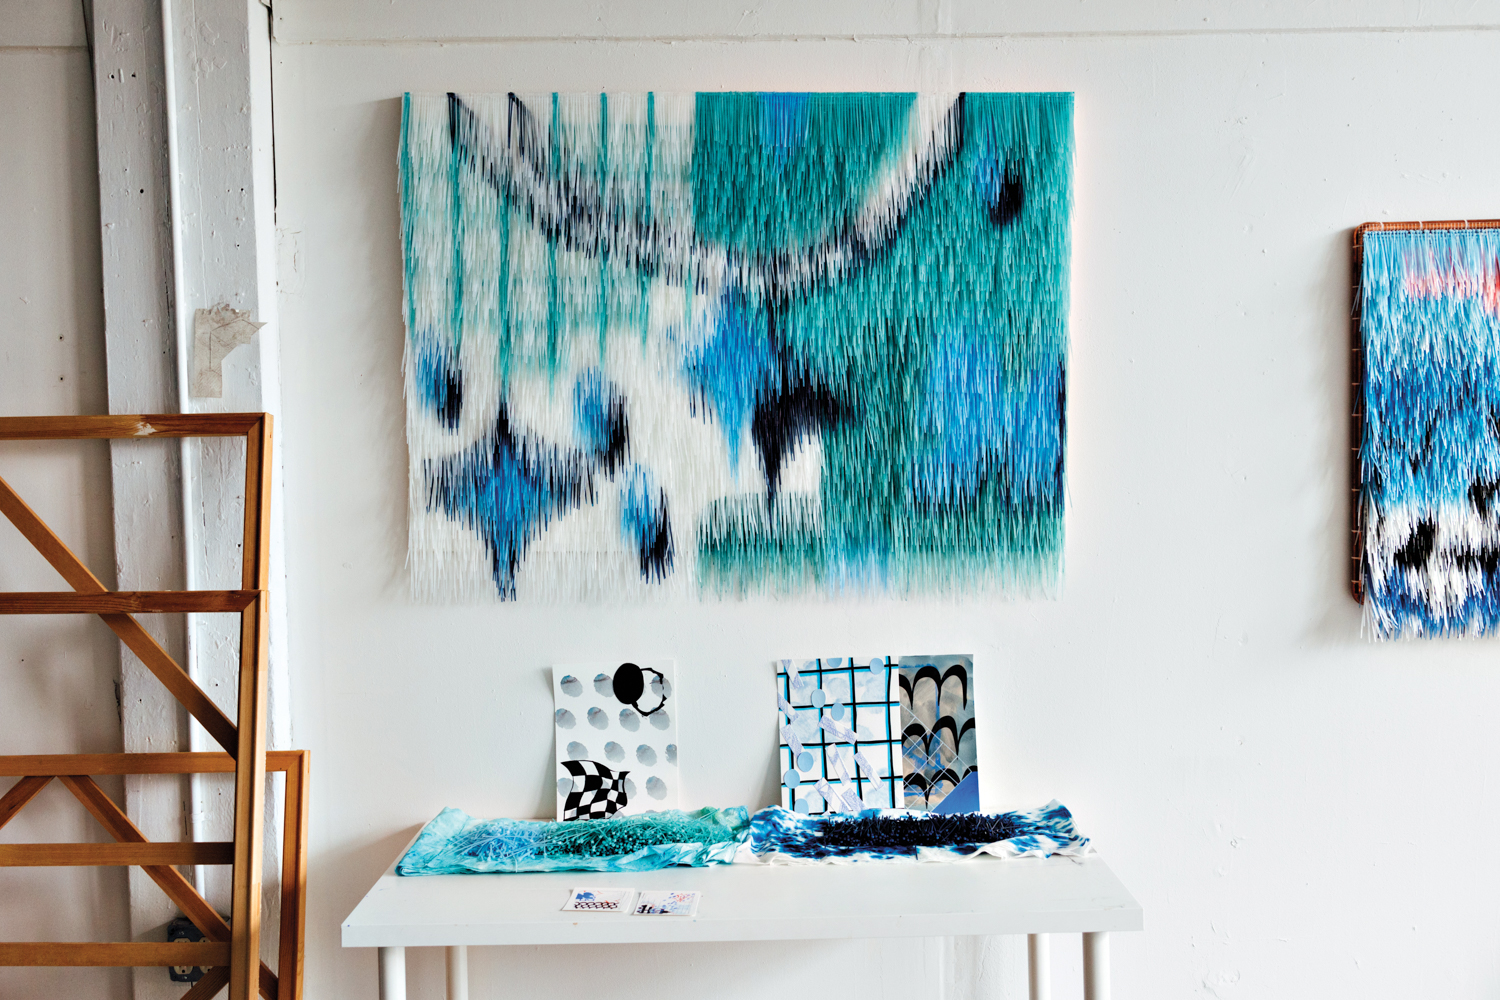 Fringed artworks hang on a studio wall with drawings on a table beneath